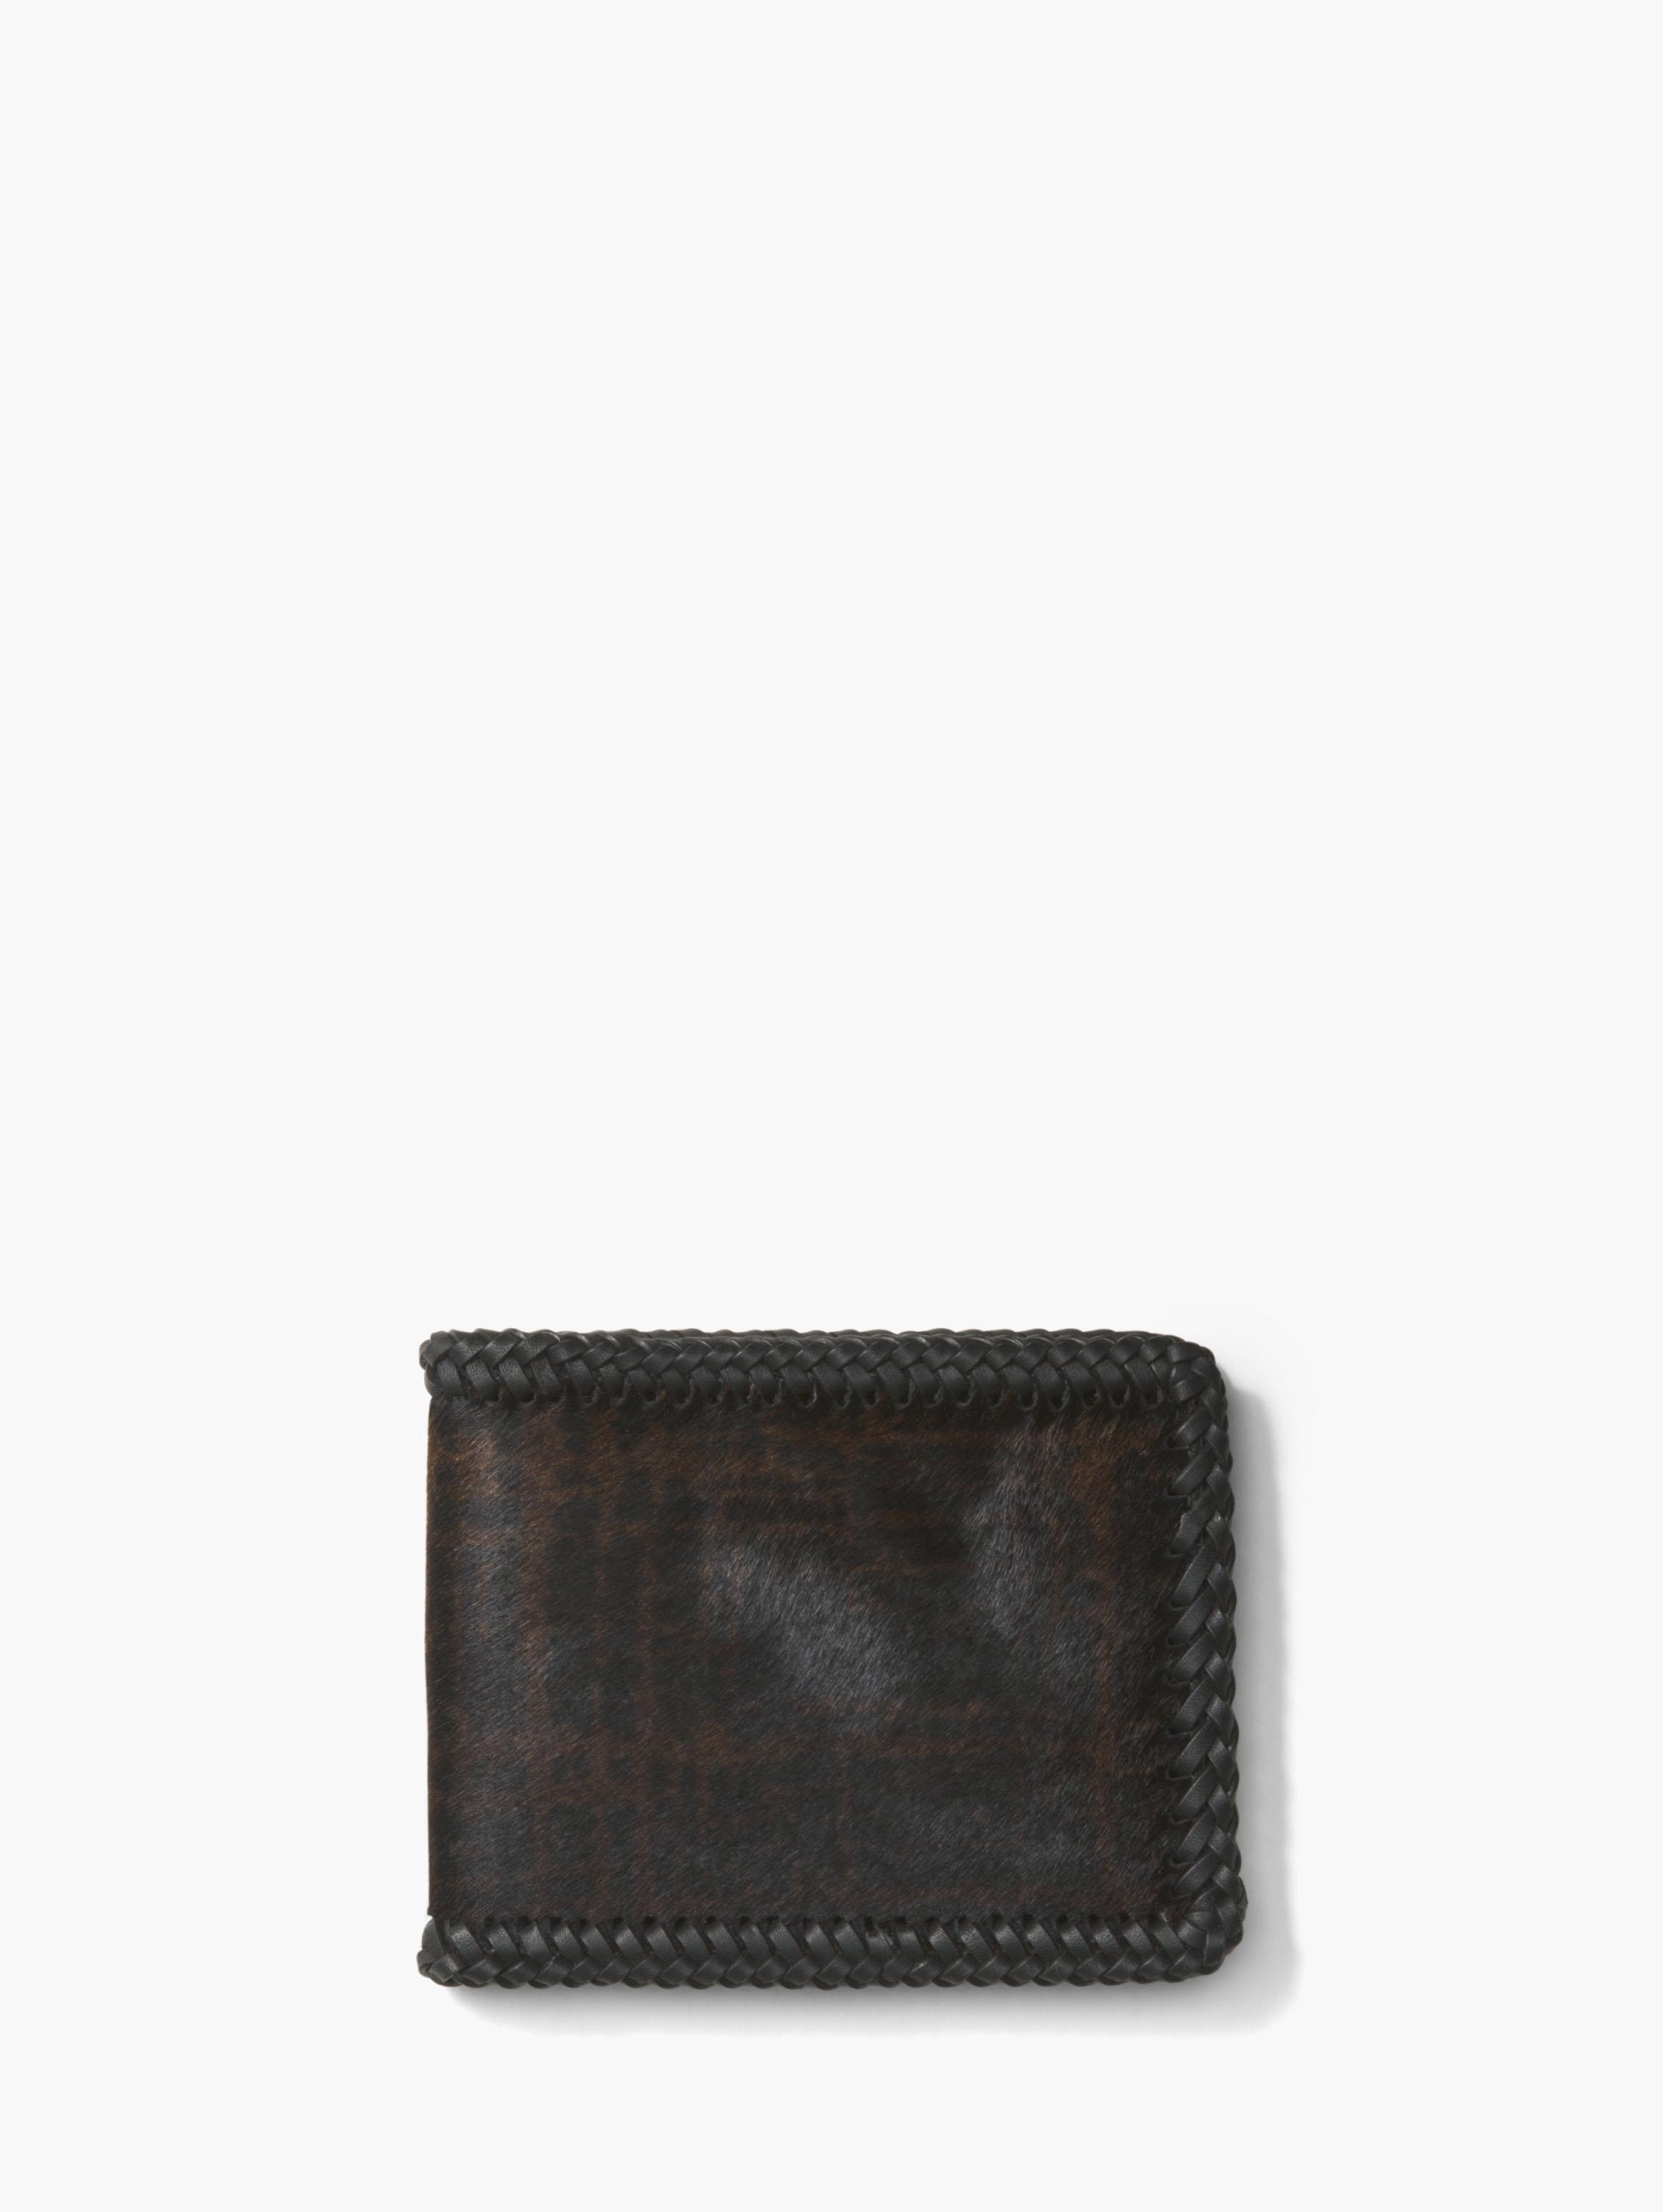 Whip Stitched Bill Fold Wallet image number 1